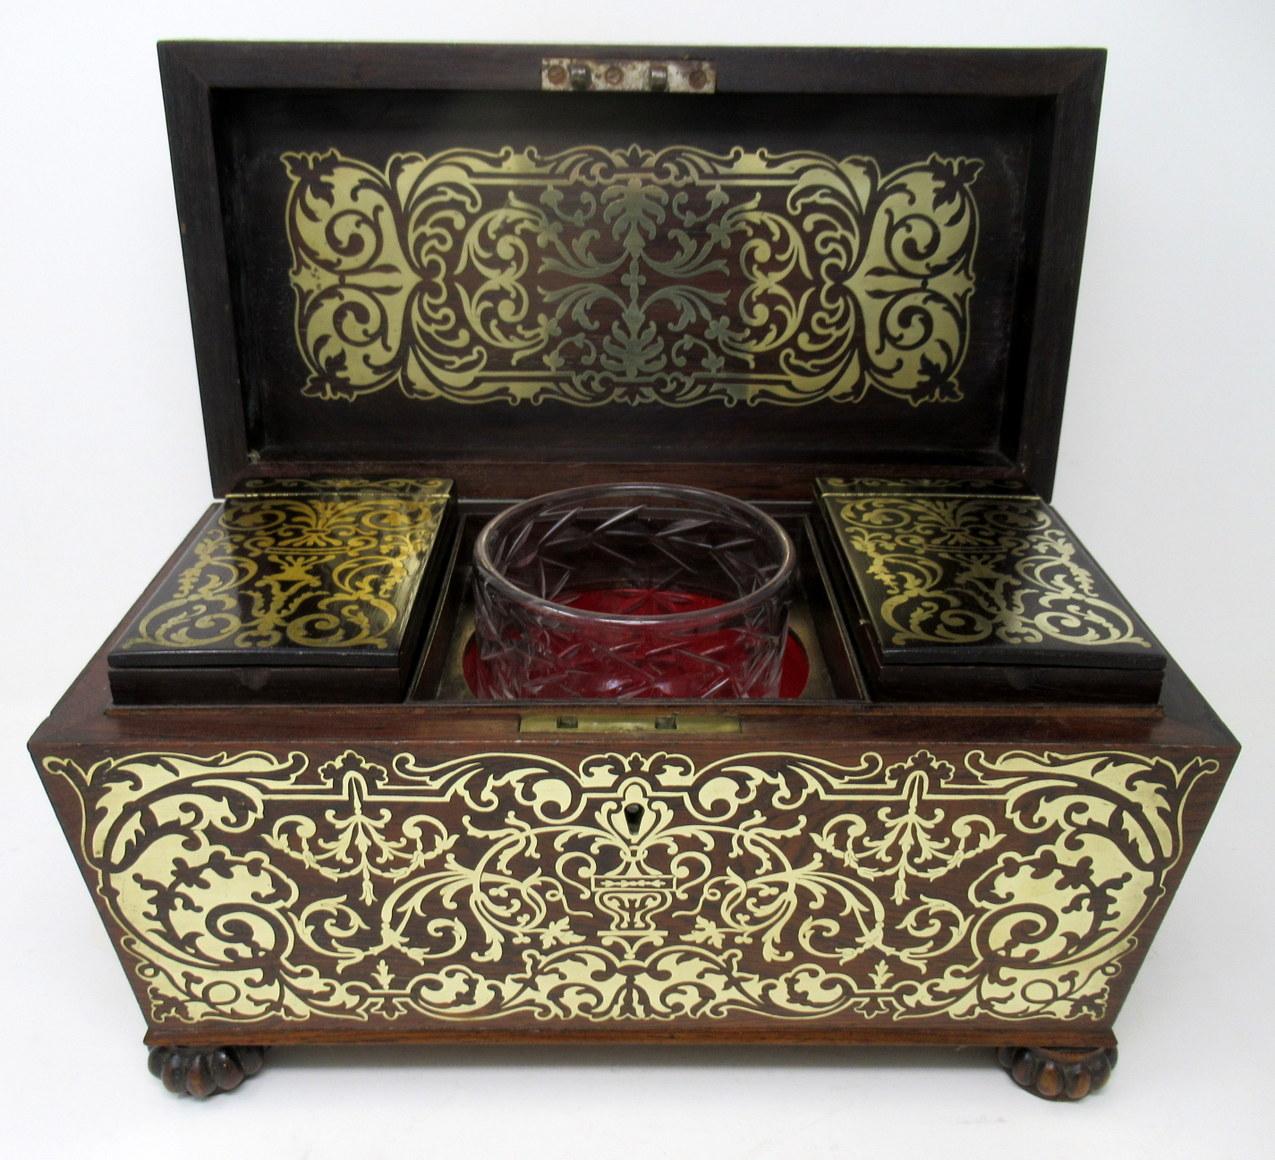 Crystal Antique Brass Inlaid Mahogany English Tea Caddy Box Regency Gillows Lancaster For Sale